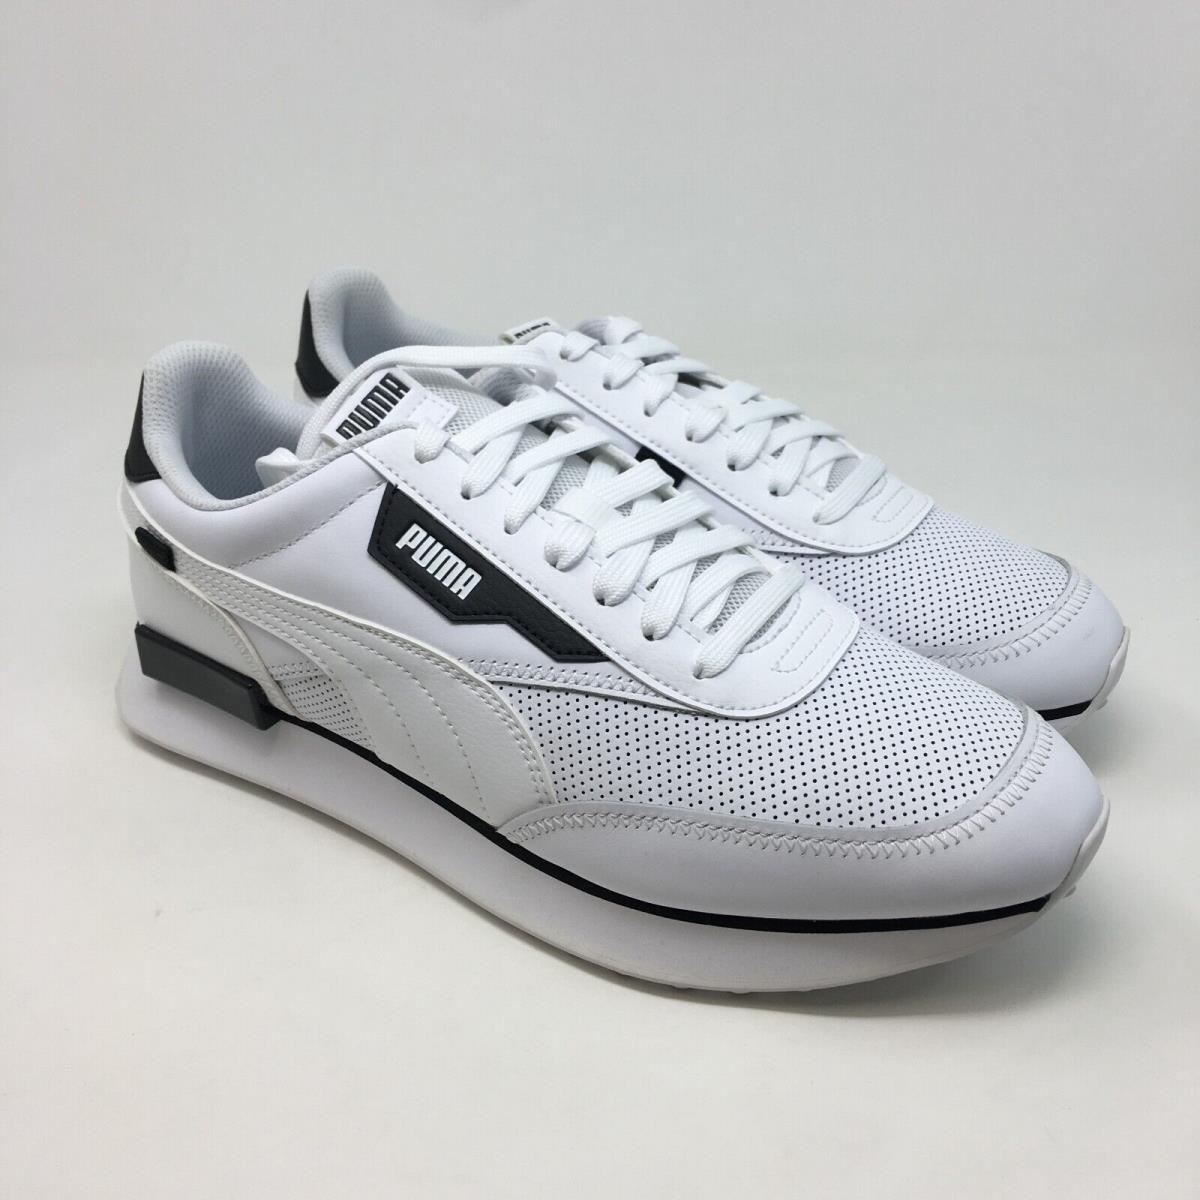 Puma Men`s Sneakers White Black Size 10.5 Future Rider Contrast Lace Up Shoes